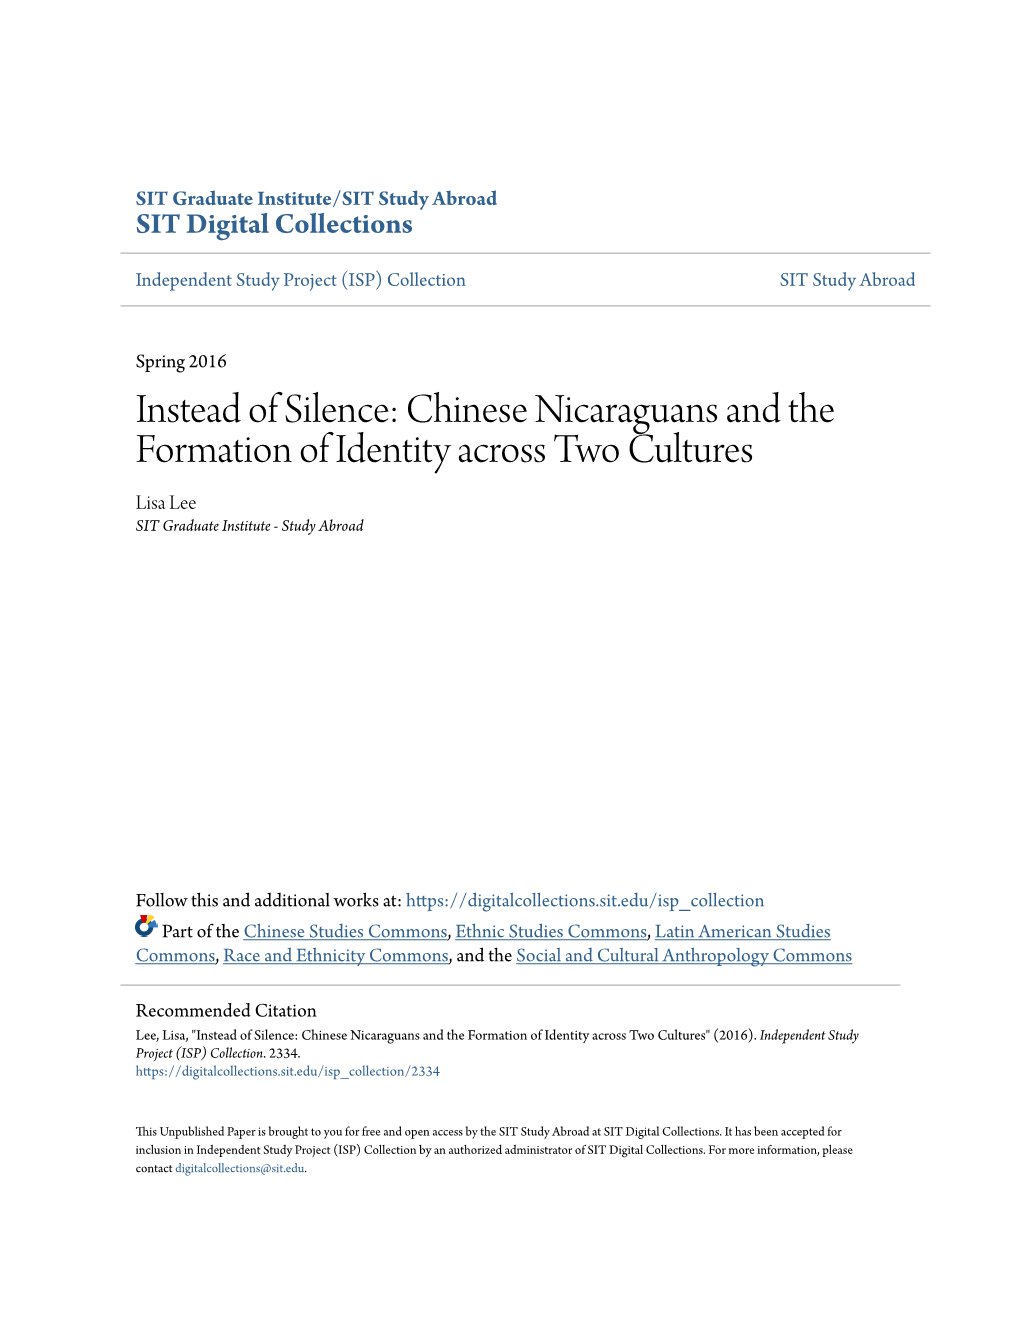 Chinese Nicaraguans and the Formation of Identity Across Two Cultures Lisa Lee SIT Graduate Institute - Study Abroad